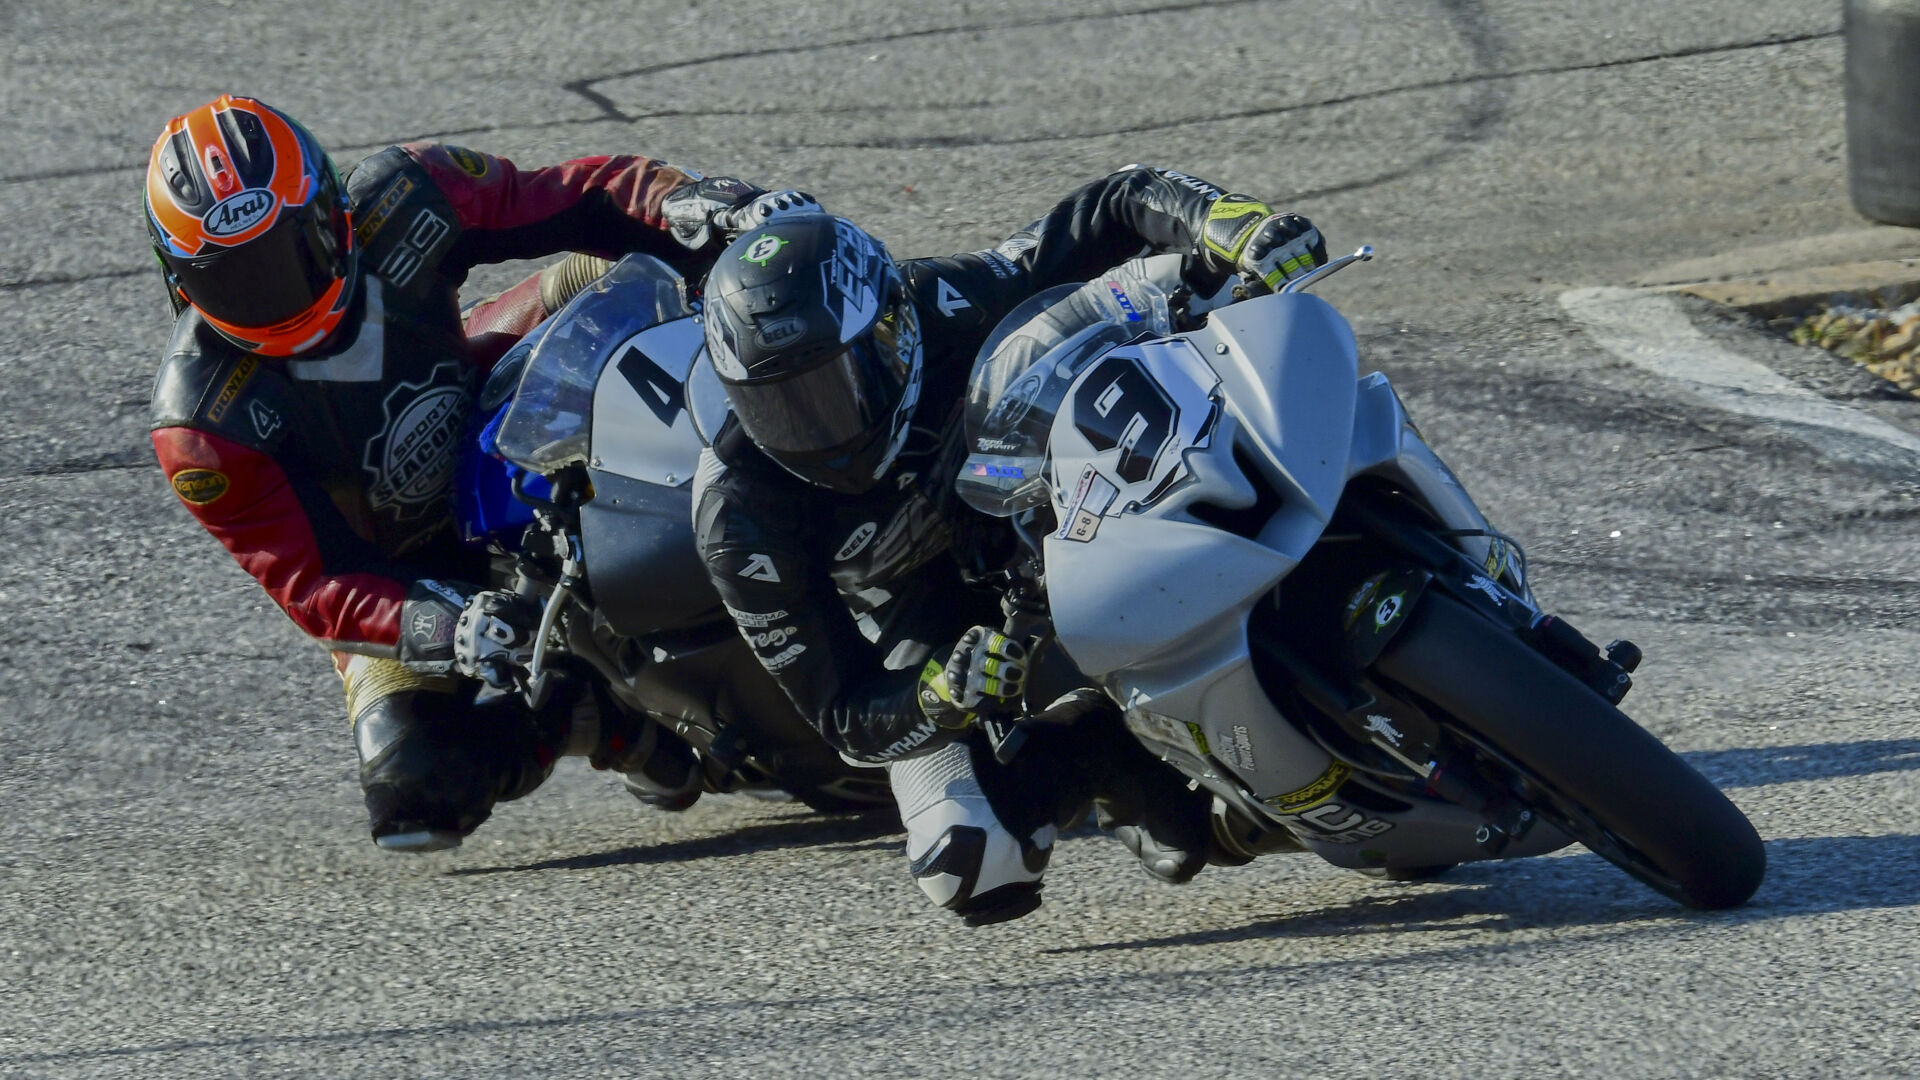 Eli Block (9) leads Scott Greenwood (1) in the Michelin-Motorace Middleweight GP at NHMS. Greenwood won the race, and Block was the runner-up. Photo by Martin Hanlon, courtesy NEMRR.